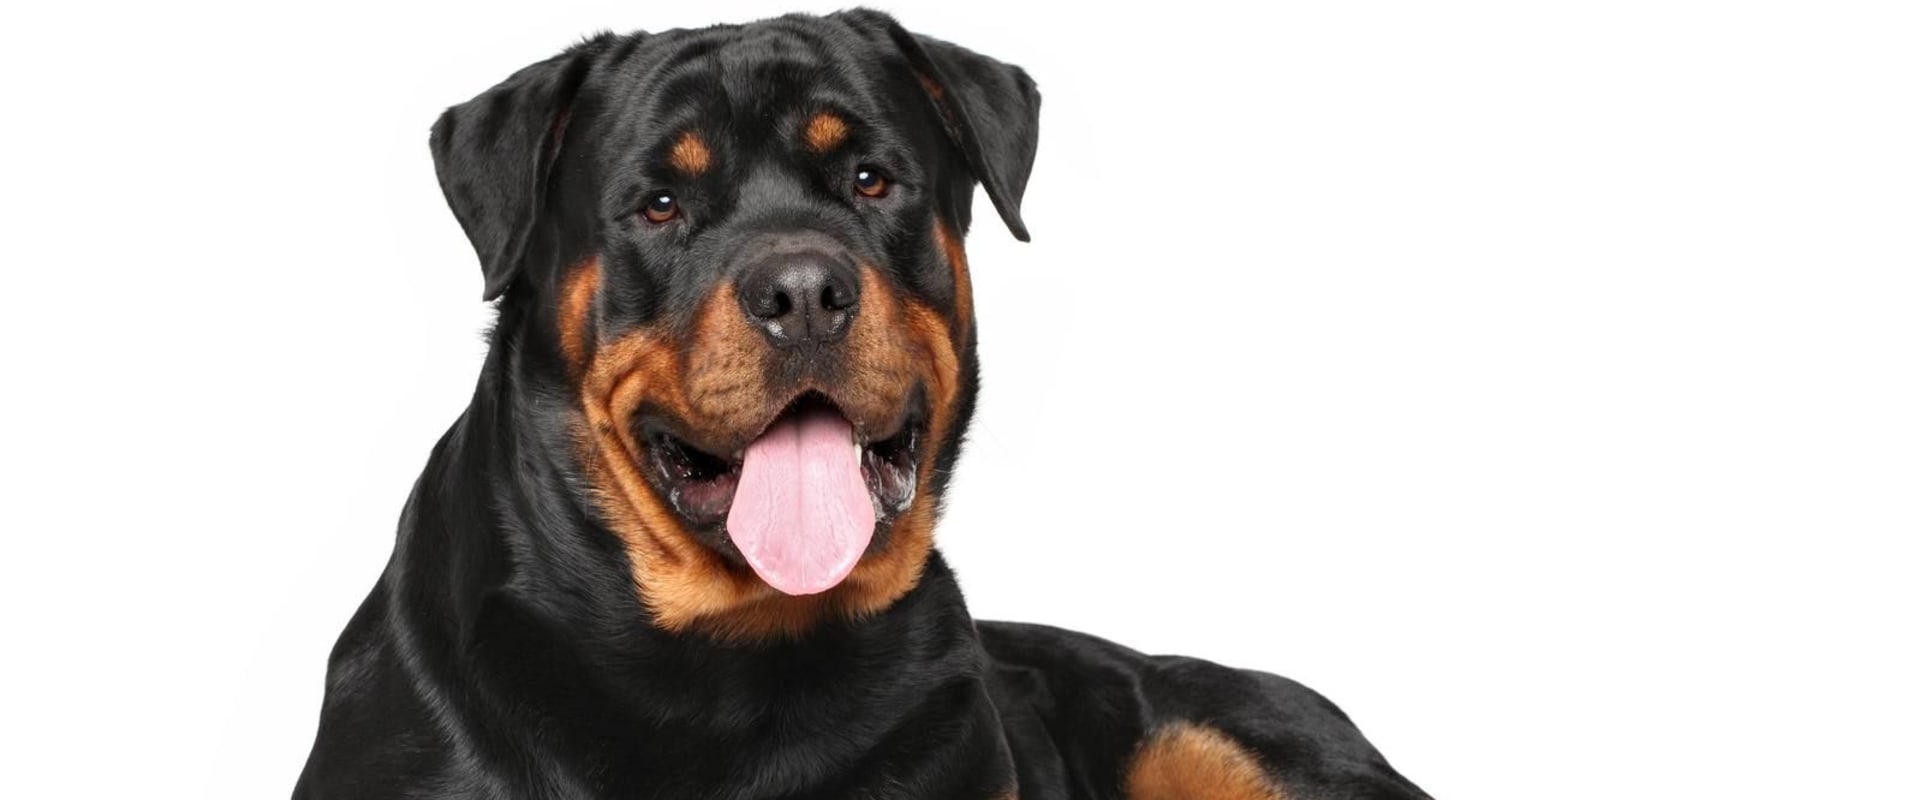 What dog is related to rottweiler?